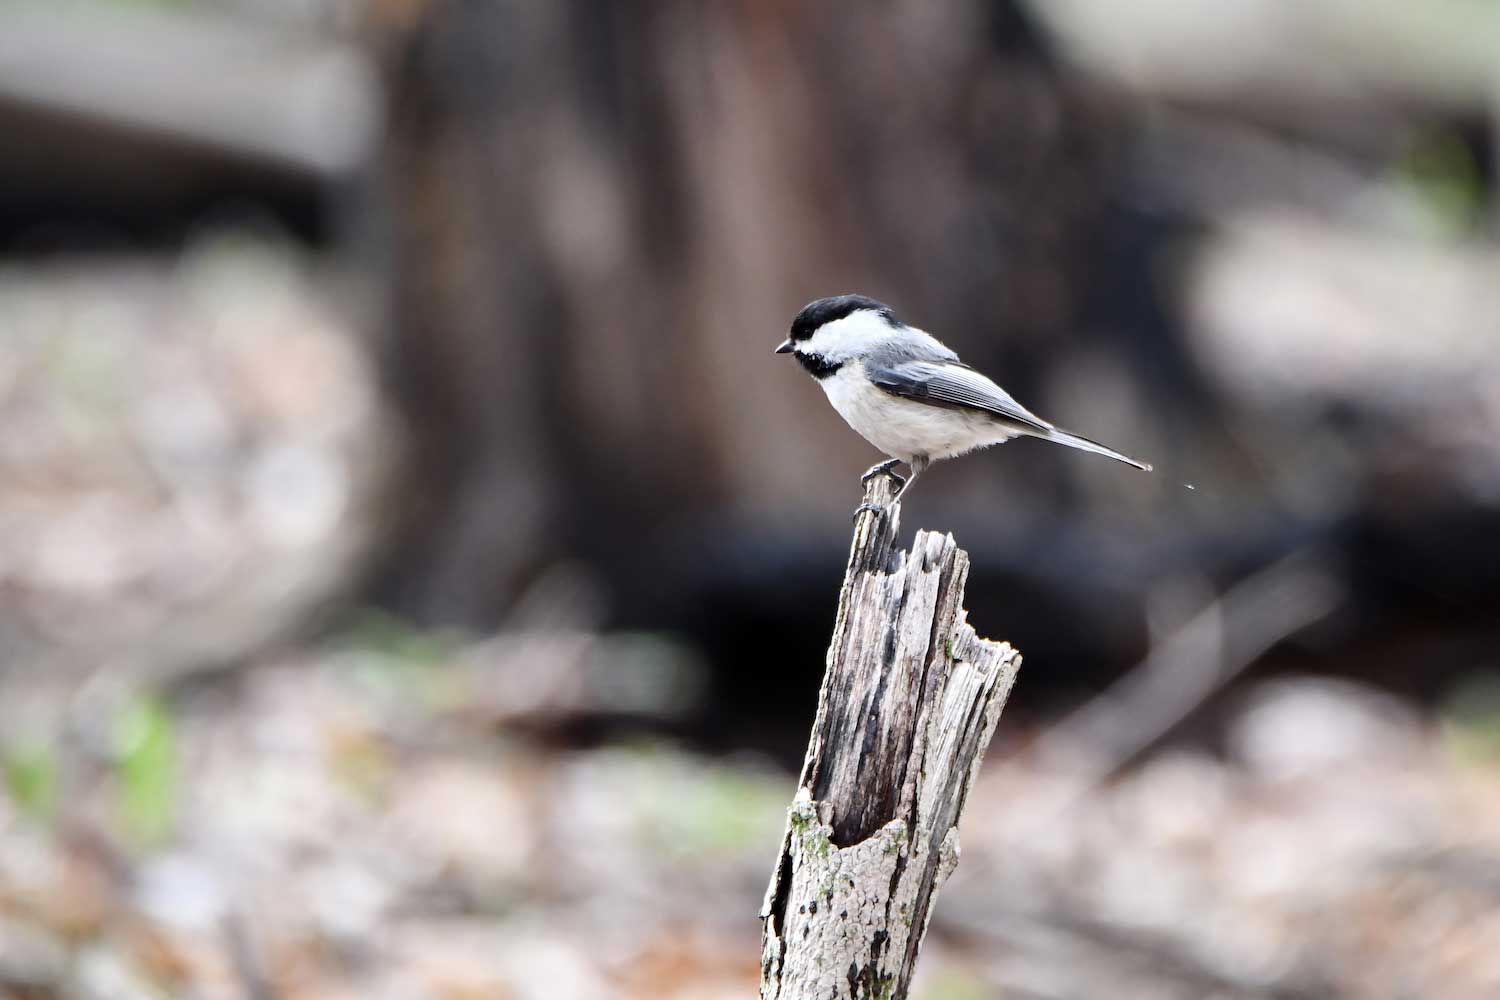 A black-capped chickadee perched atop a broken tree branch.